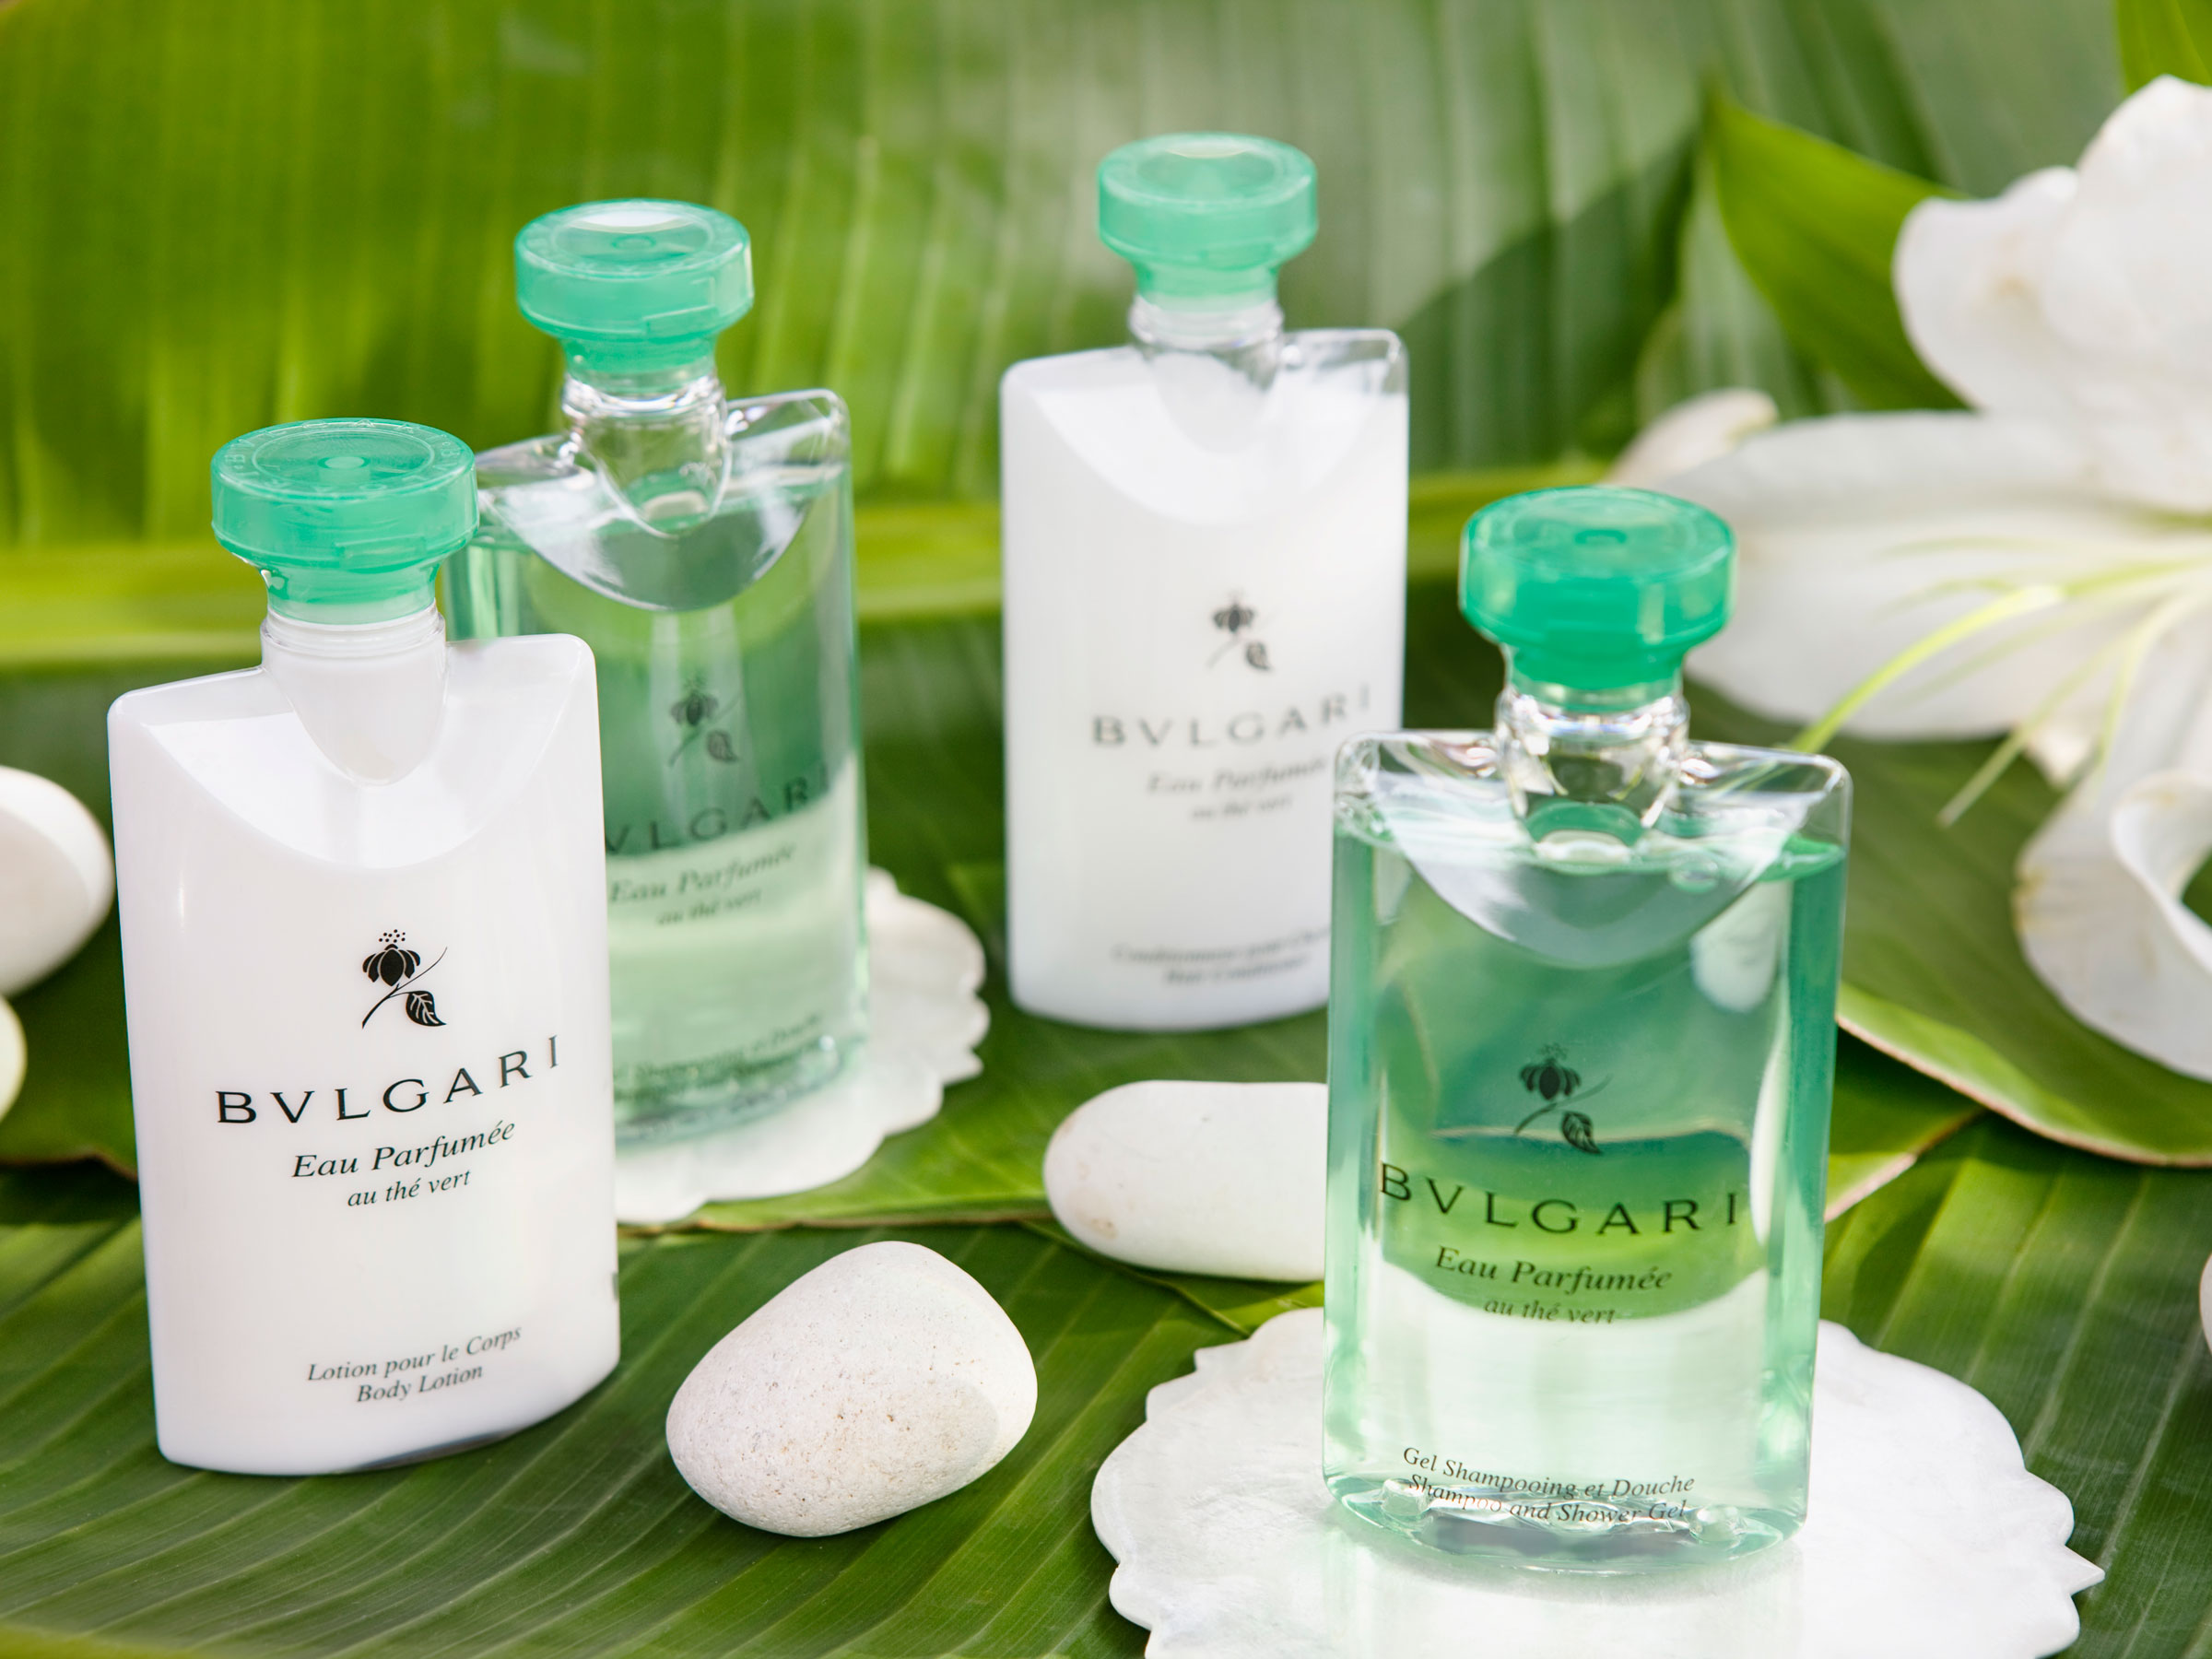 Bvlgari Bath Amenities in a Romantic Hotel Room with Jacuzzi